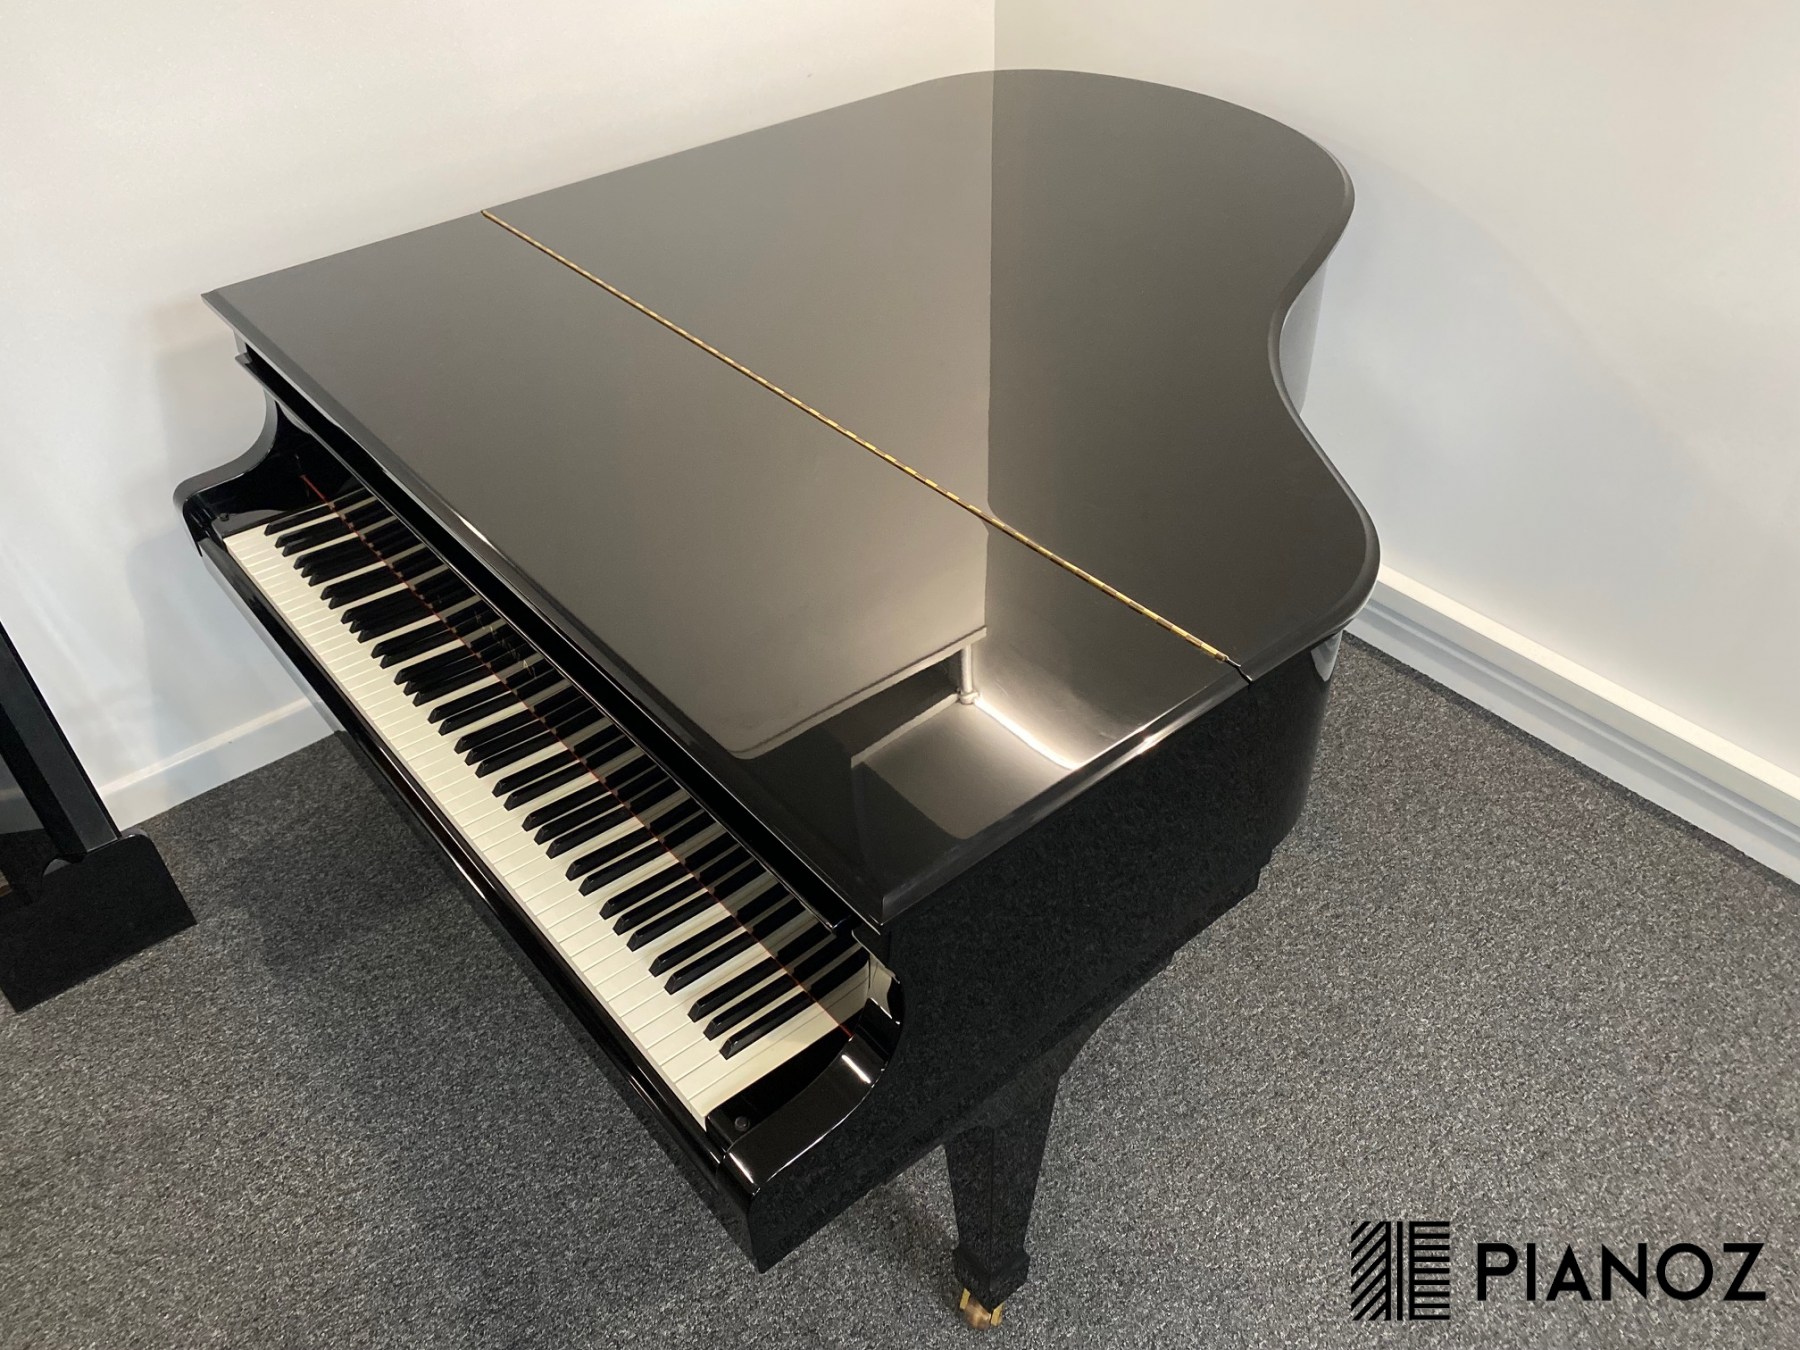 Kawai RX2 Japanese Grand Piano piano for sale in UK